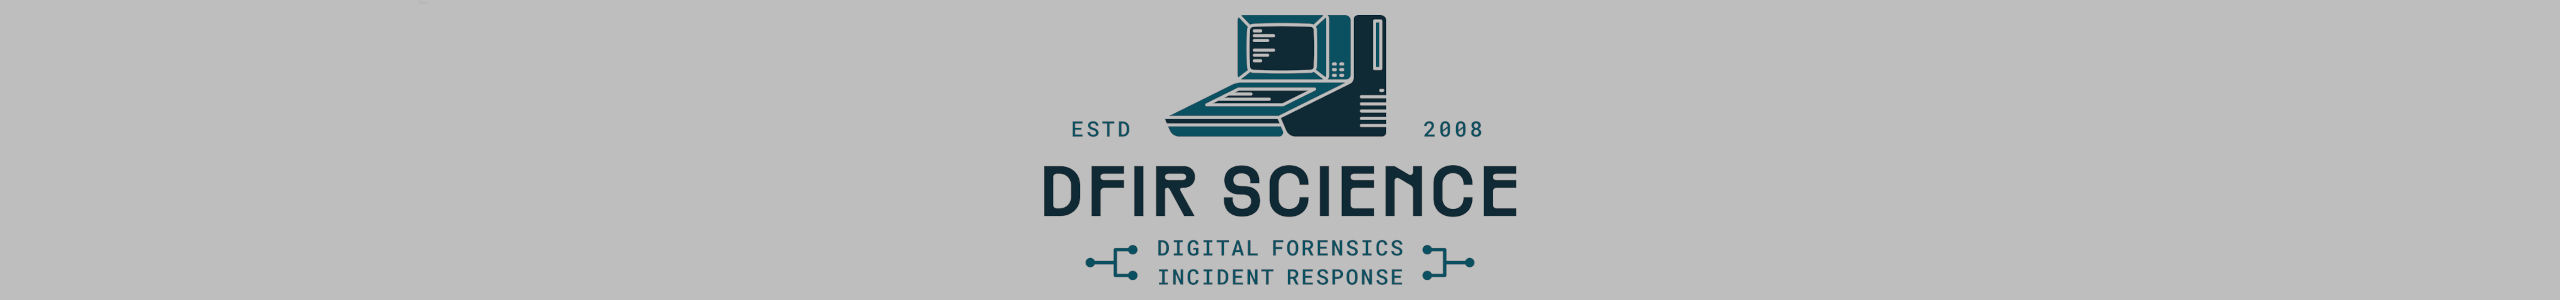 Getting started in DFIR: Conferences and Workshops